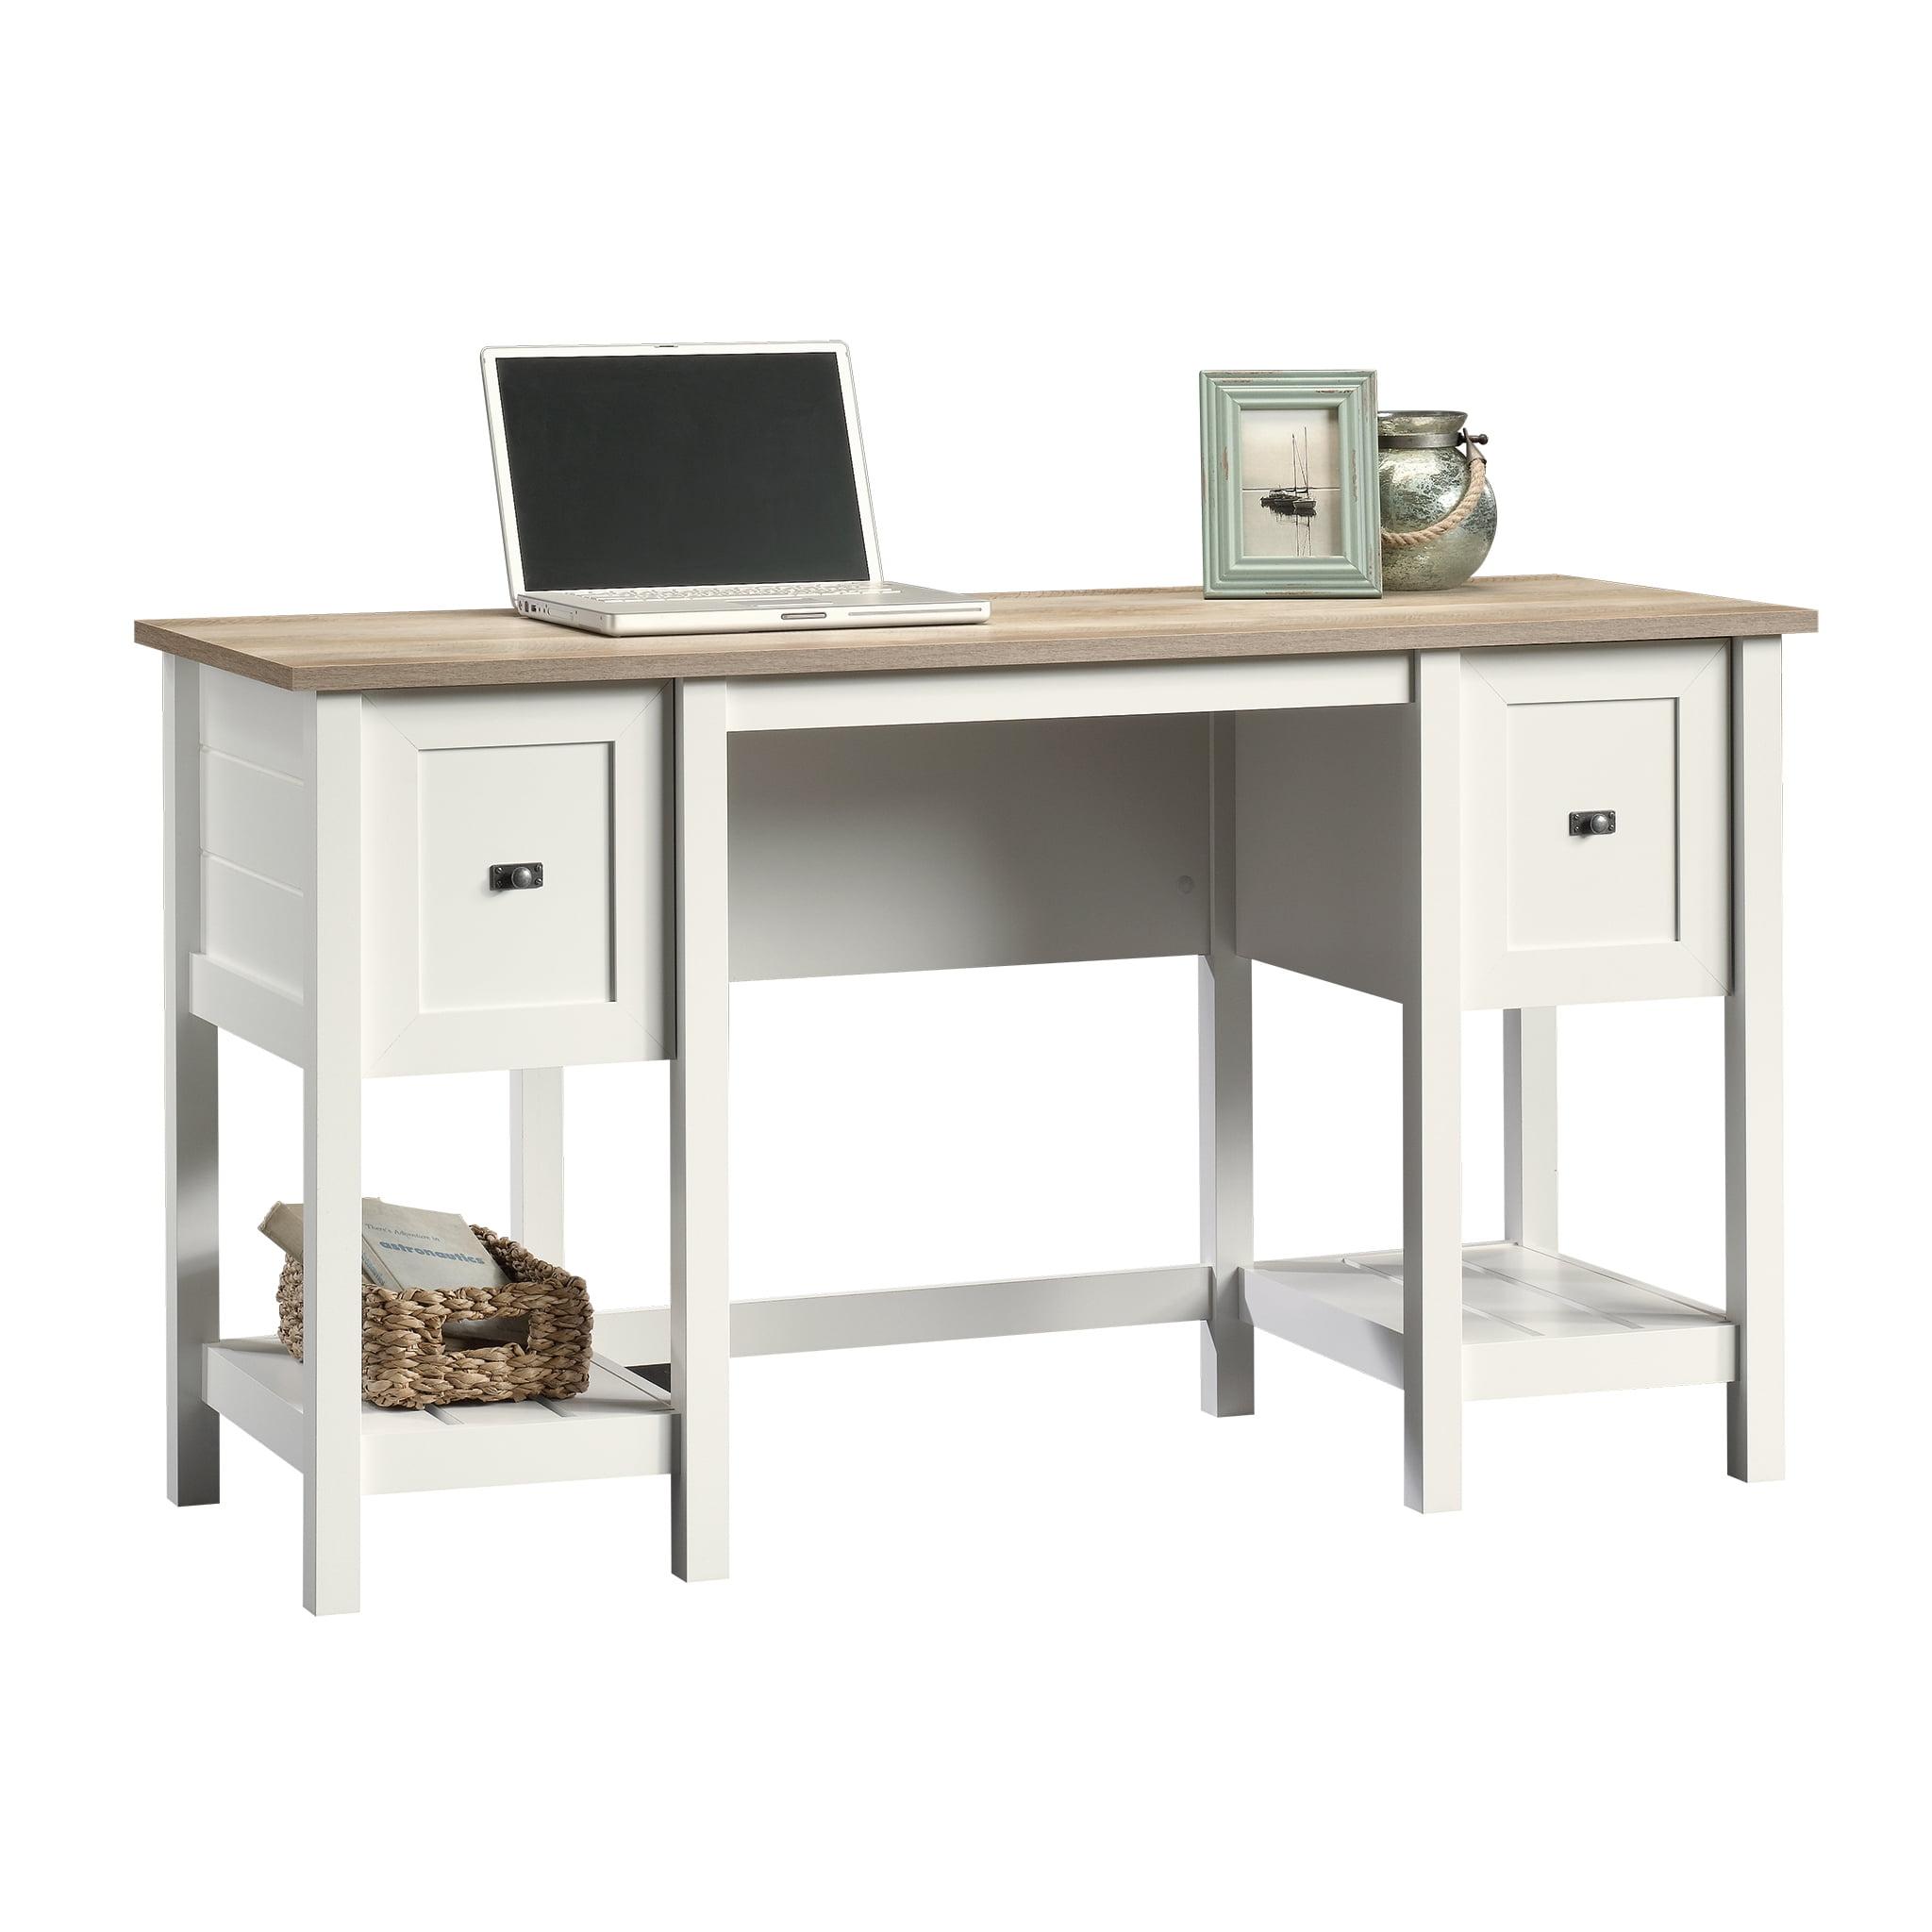 Cottage Road Soft White Wooden Double Pedestal Desk with Nickel Hardware